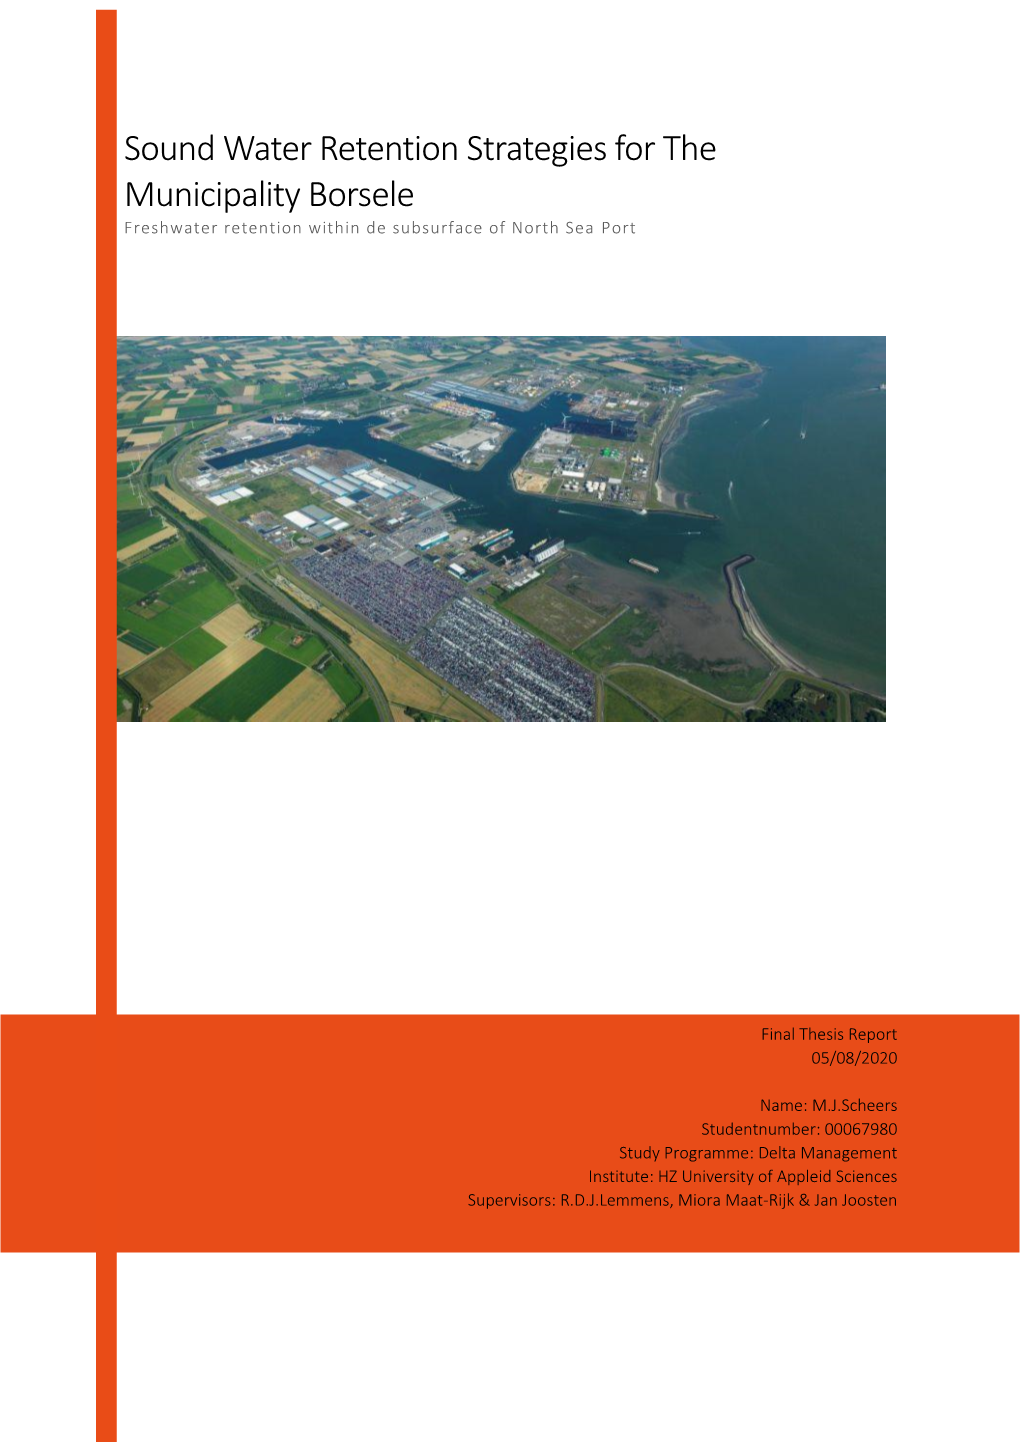 Sound Water Retention Strategies for the Municipality Borsele Freshwater Retention Within De Subsurface of North Sea Port